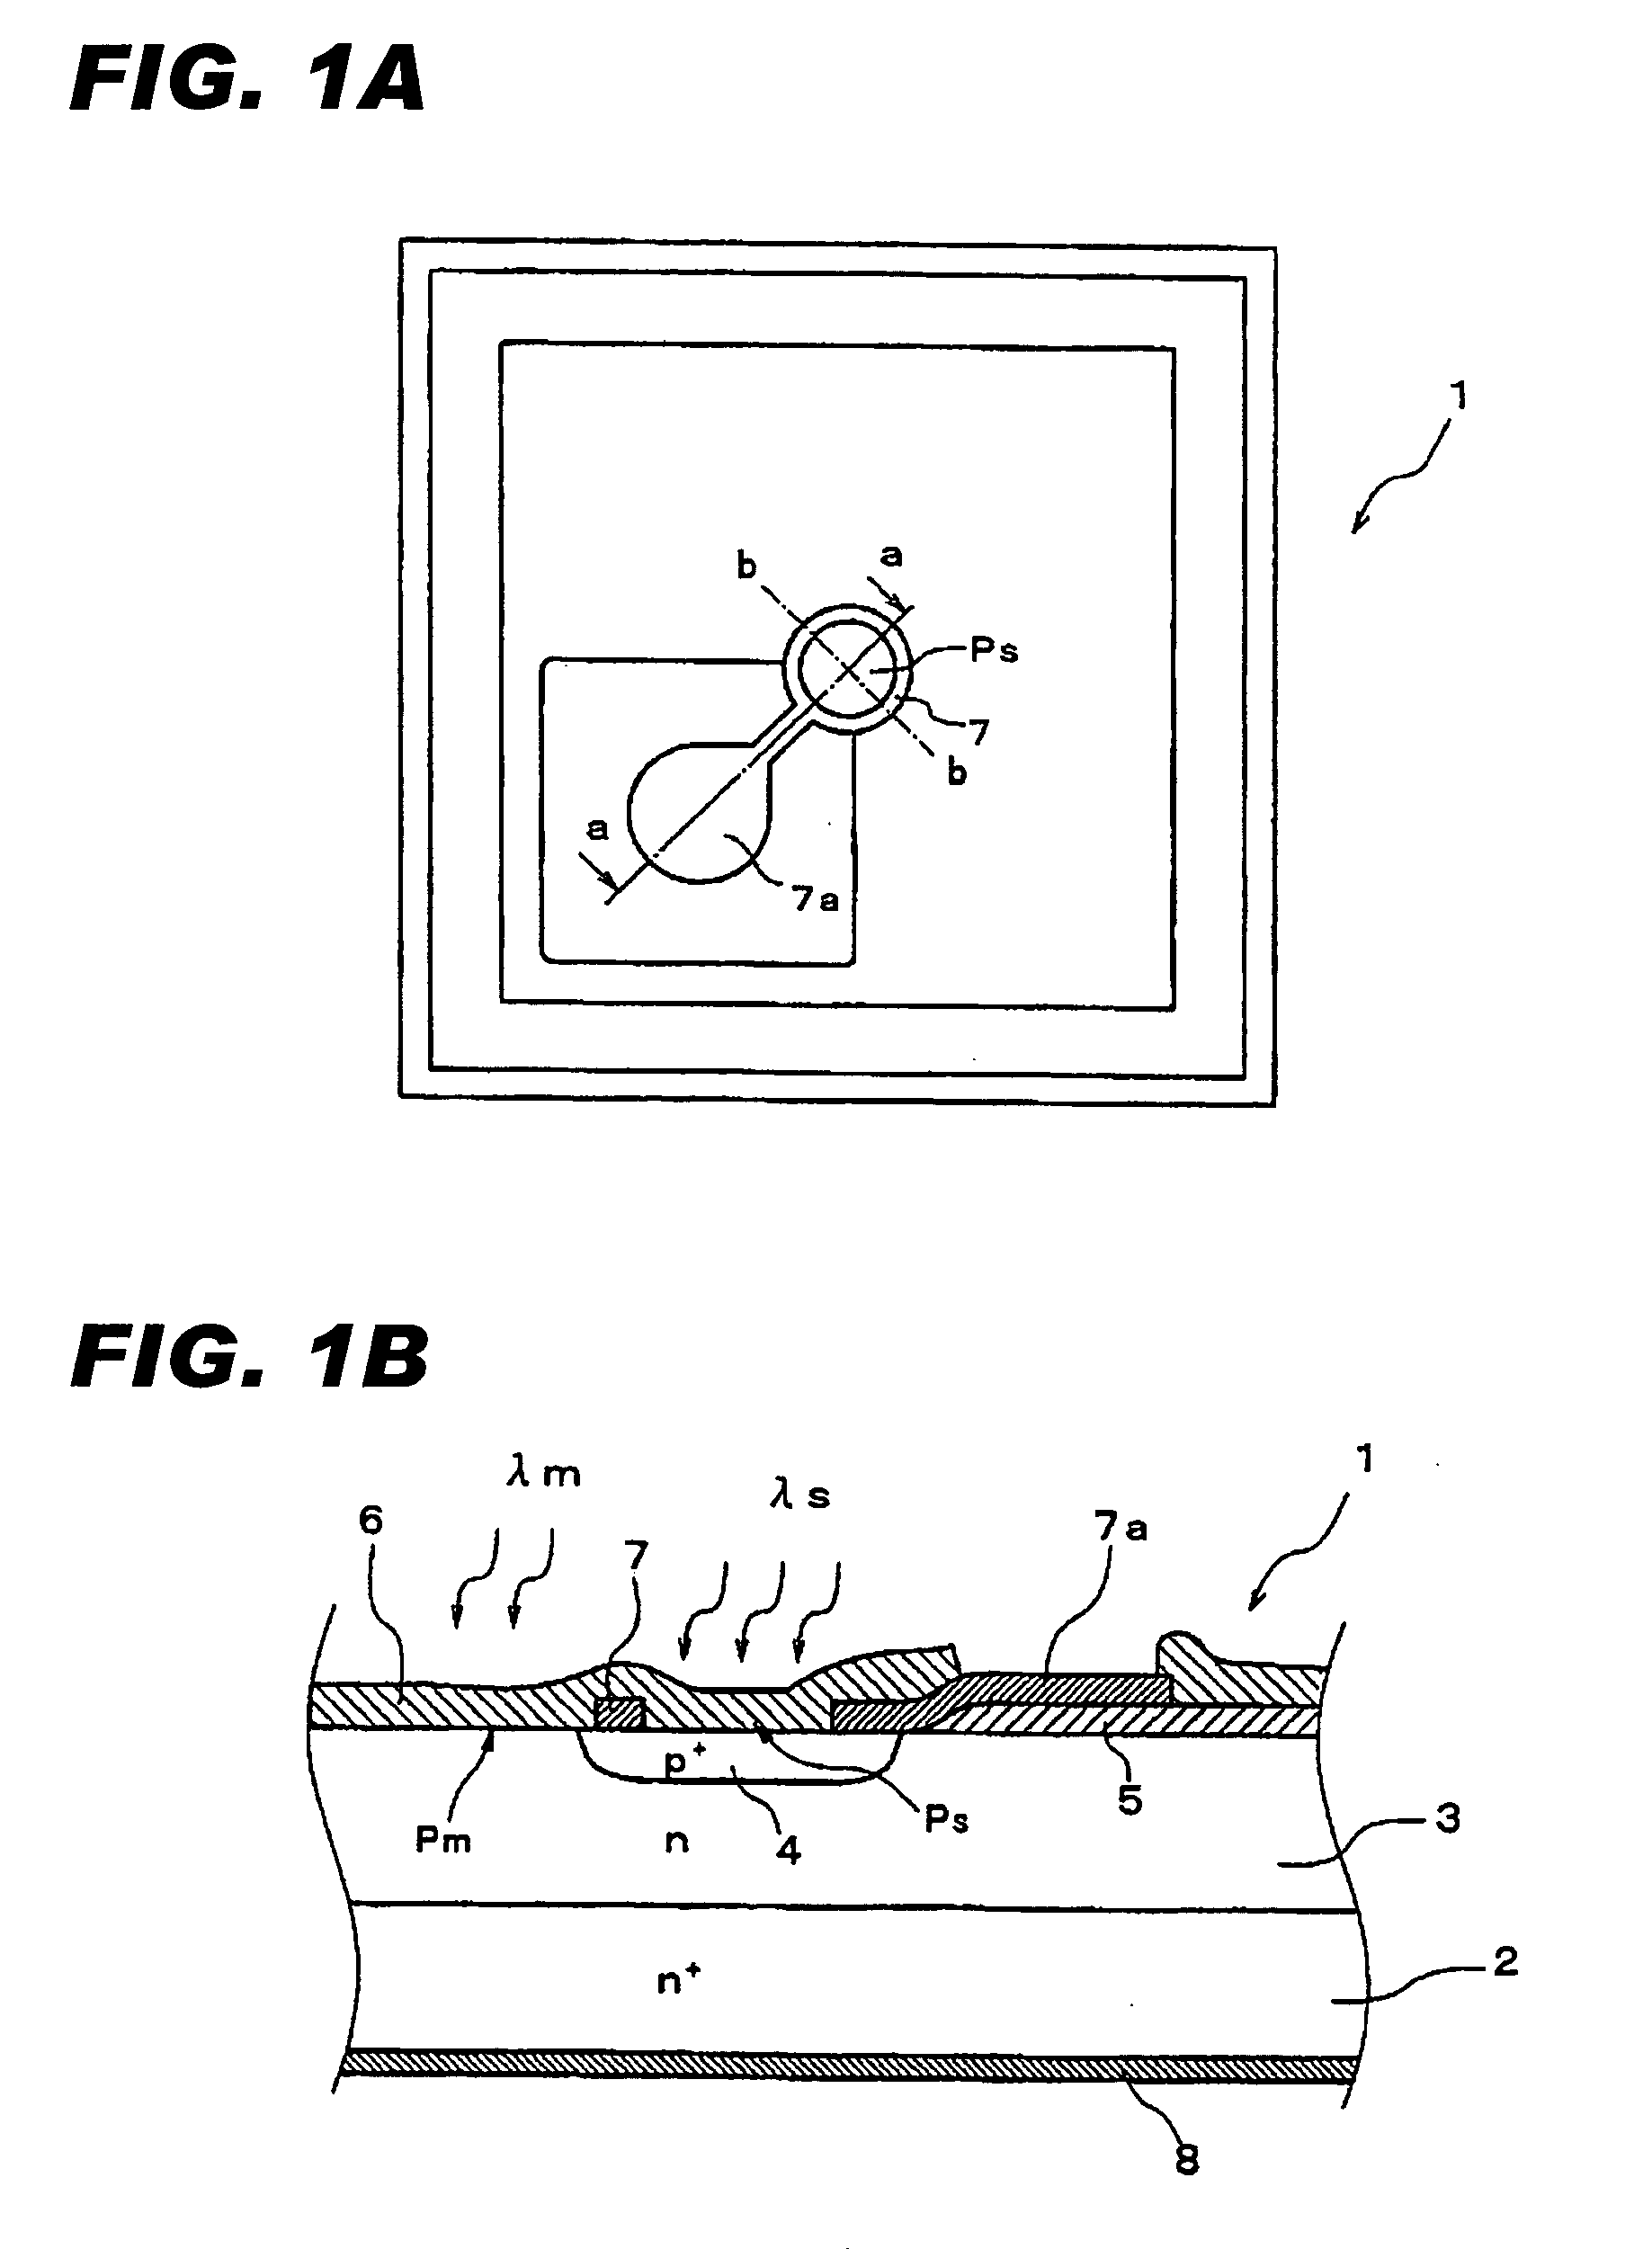 Light-receiving method of an avalanche photodiode and a bias control circuit of the same